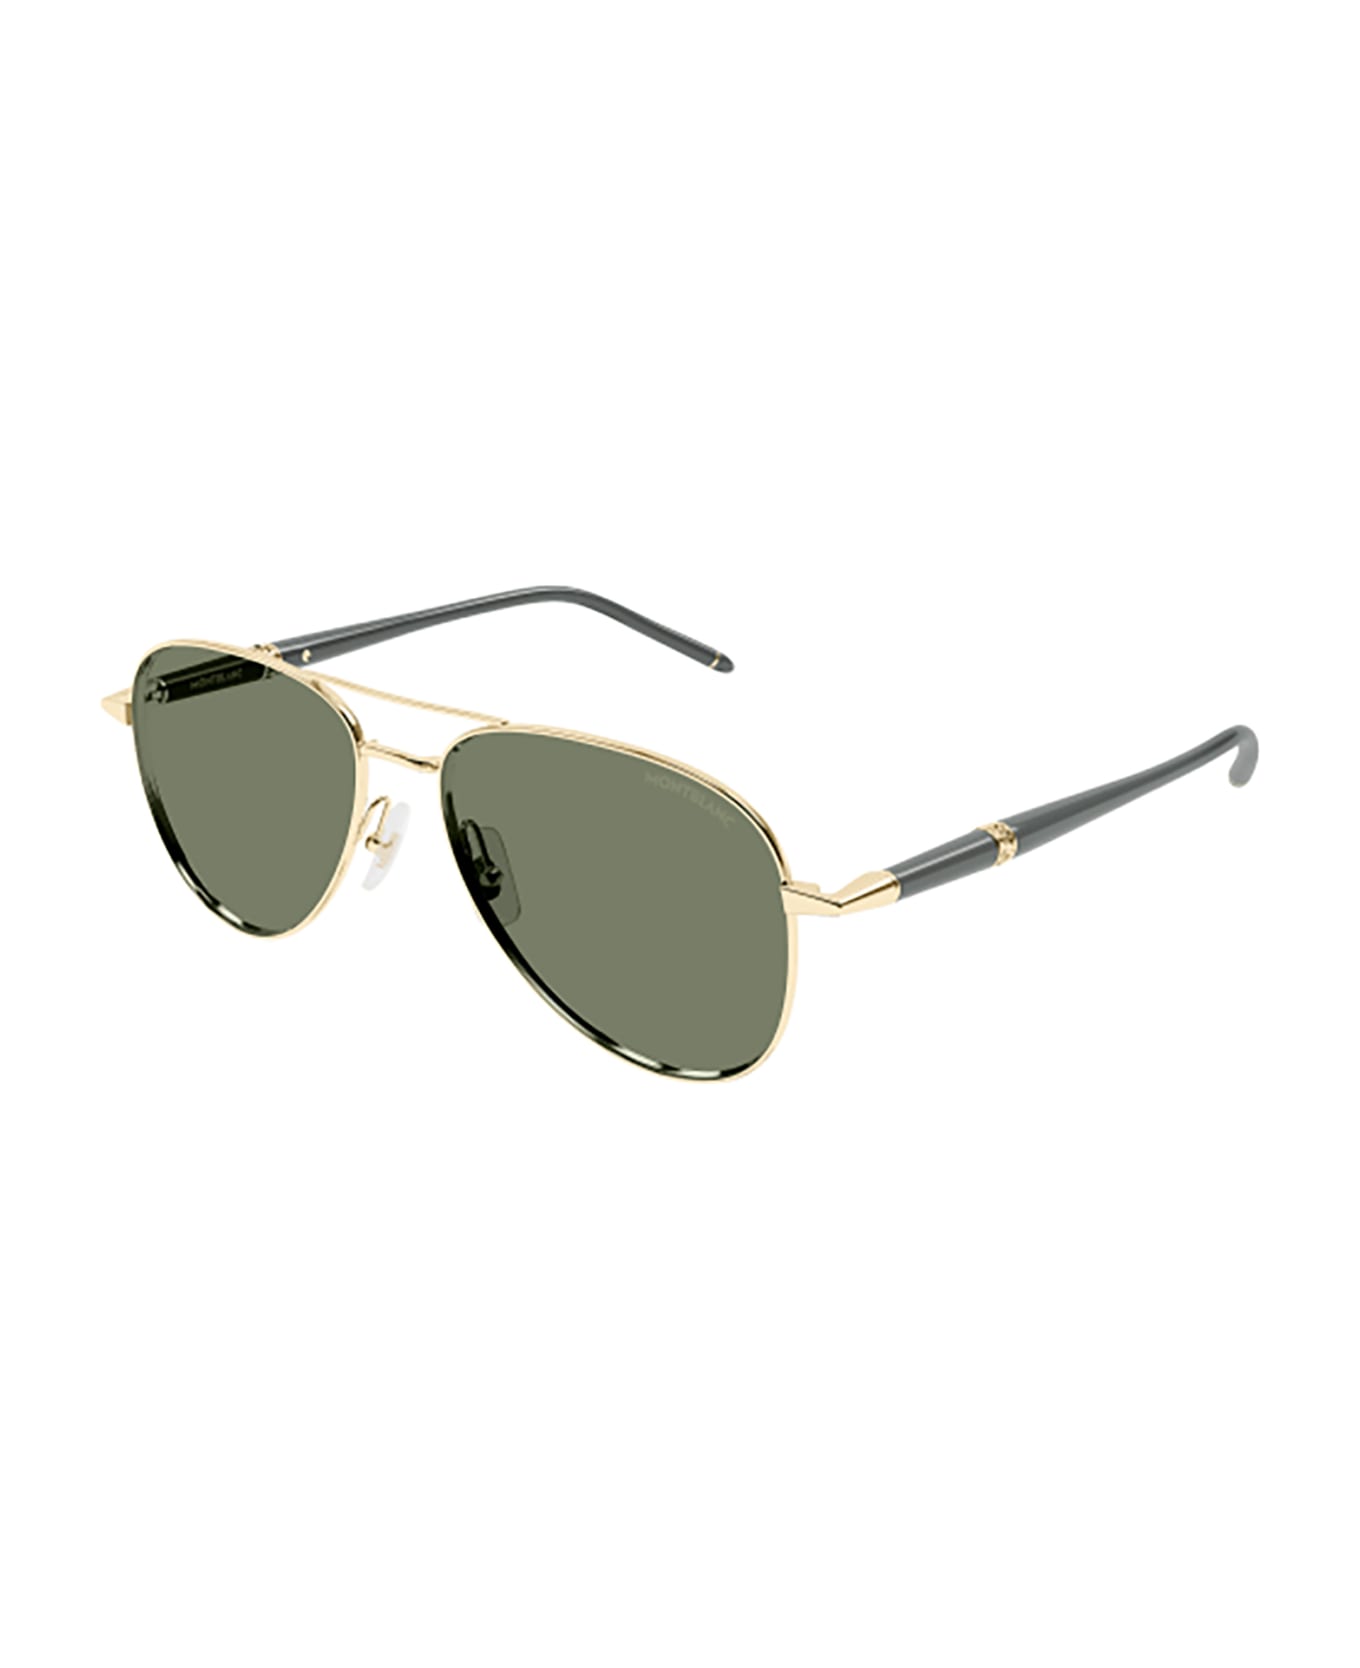 Montblanc MB0345S Sunglasses - Gold Grey Green